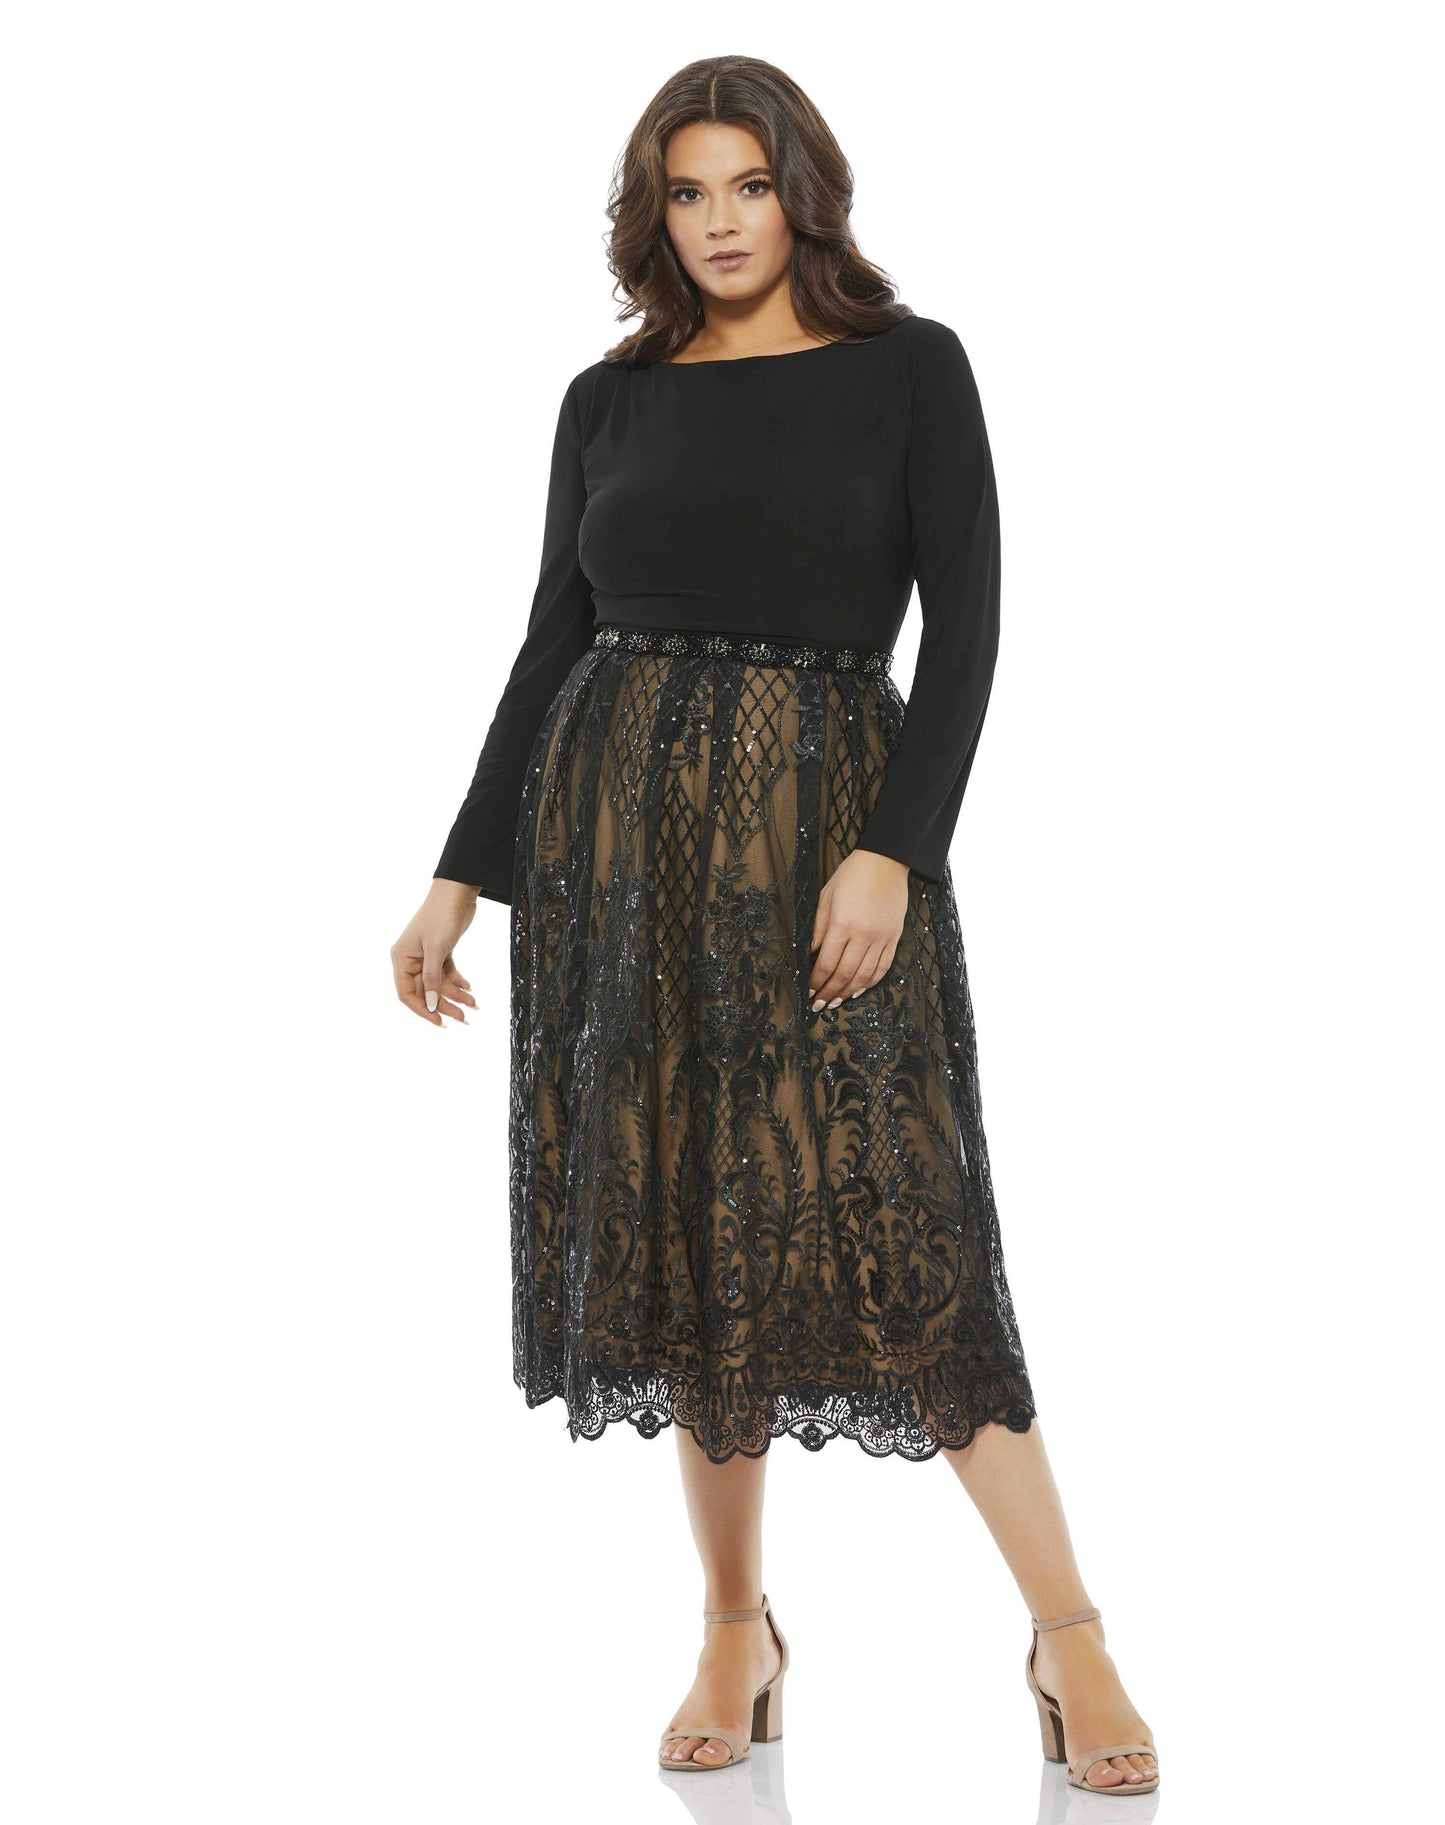 This chic cocktail dress makes a breathtaking look for special occasions. The mid-length dress opens with a minimalist jersey bodice cut with a pretty bateau neckline. An ornate beaded belt connects the top to an embroidered skirt stitched with lattices o